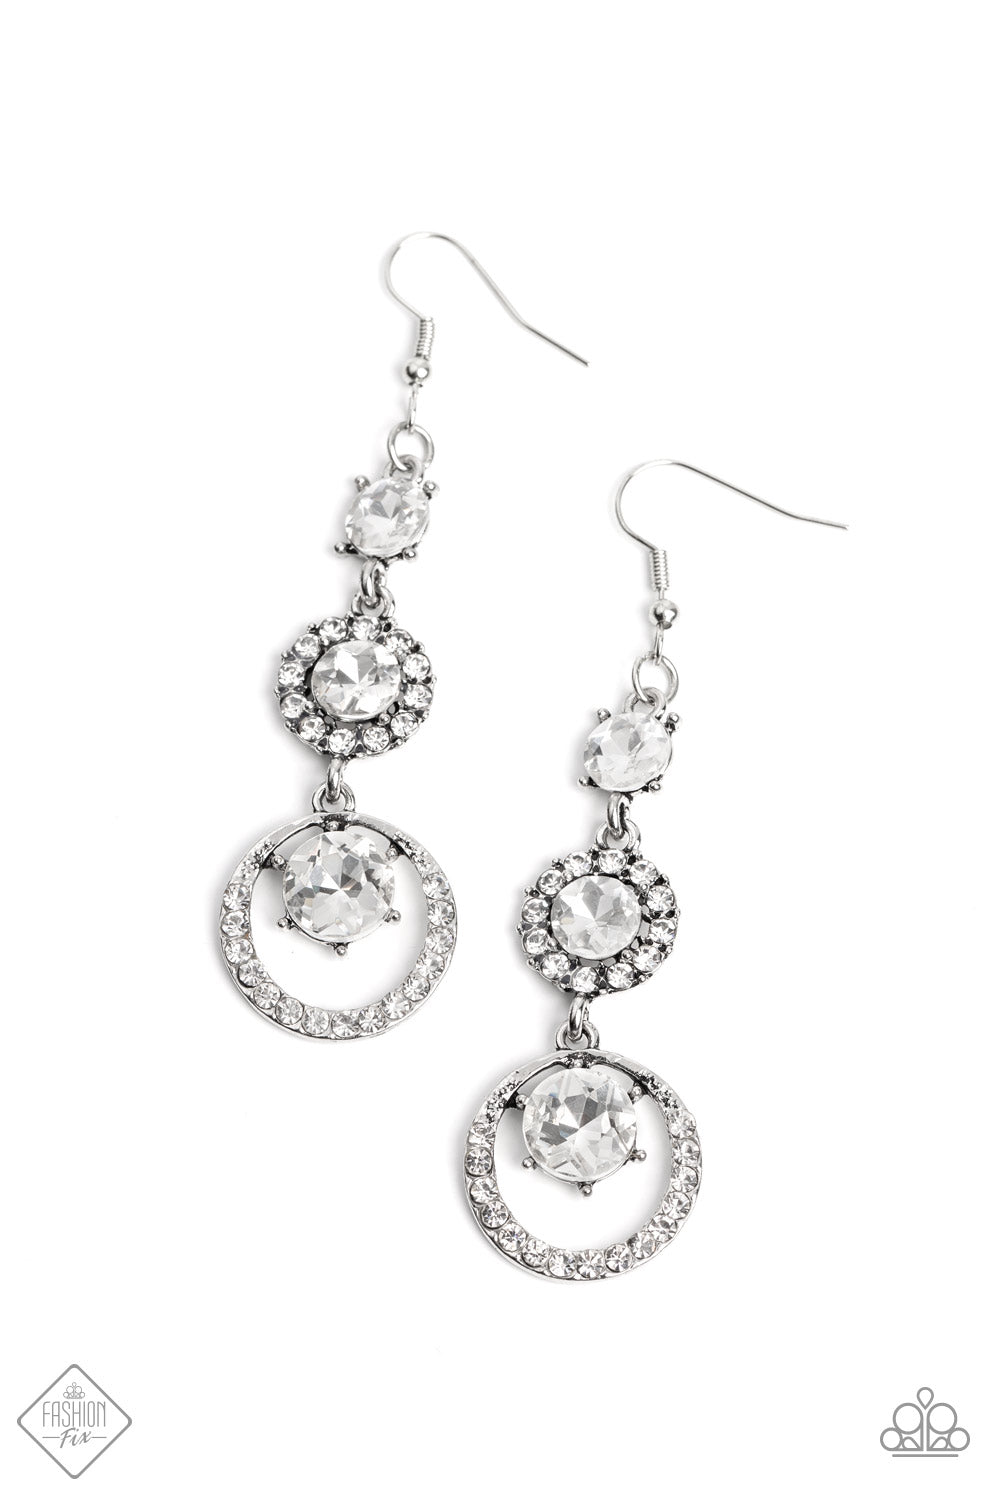 Enchanting Effulgence - White Gem and Silver Earrings - Paparazzi Accessories - A glamorous collection of brilliant, round, white gems drip down the ear, creating an irresistibly refined lure. The topmost gem features pronged fittings, followed by the center gem that is bordered by a halo of dainty white rhinestones for additional eye-catching shimmer. Encircling the lower-most gem, an airy, rhinestone-encrusted hoop completes the dazzling design.